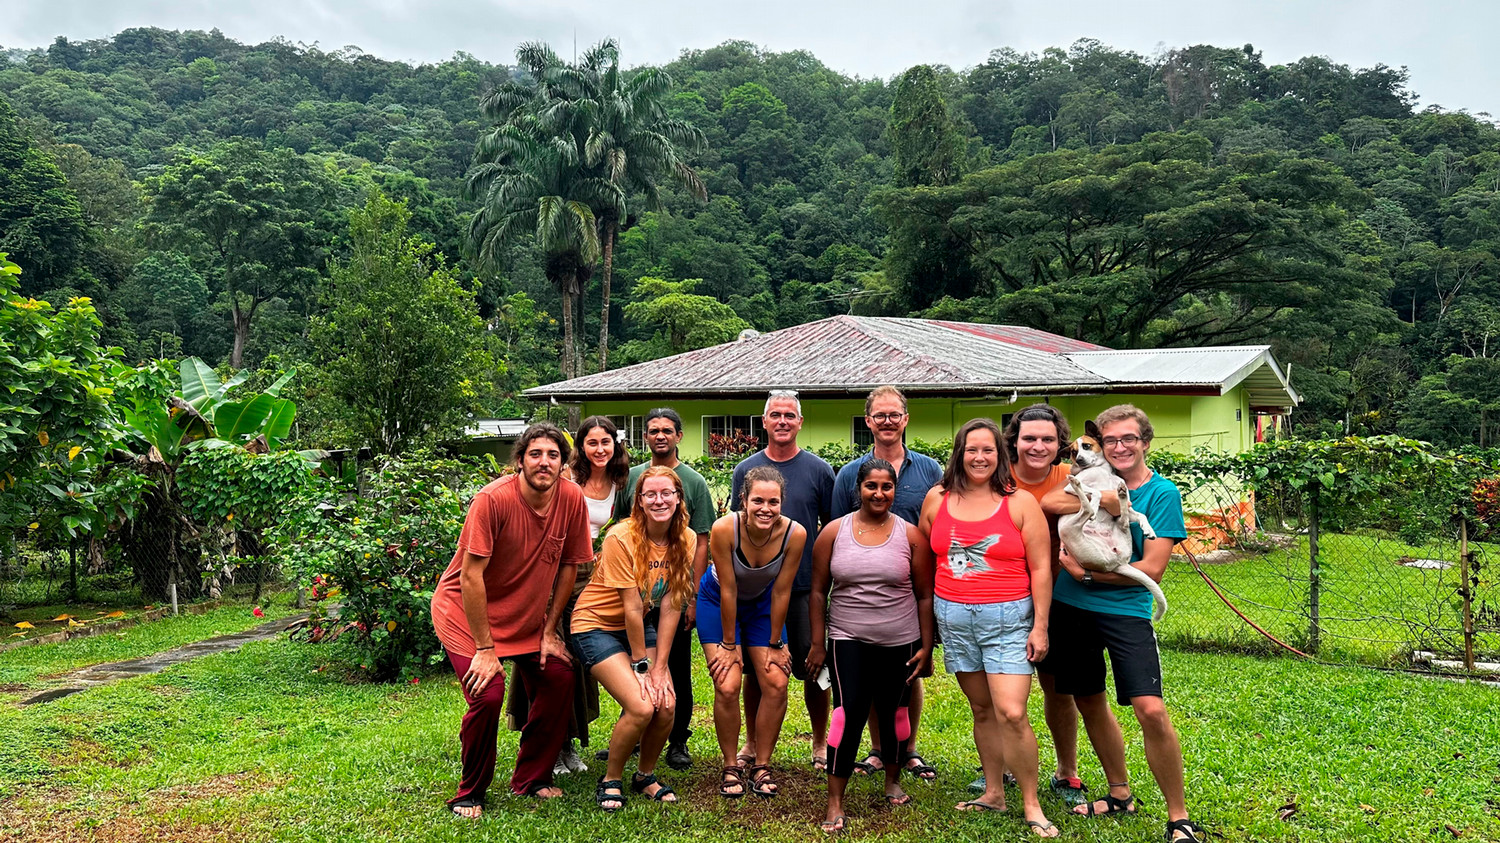 Prof. Bassar with postdocs and field crew at the field station in Trinidad